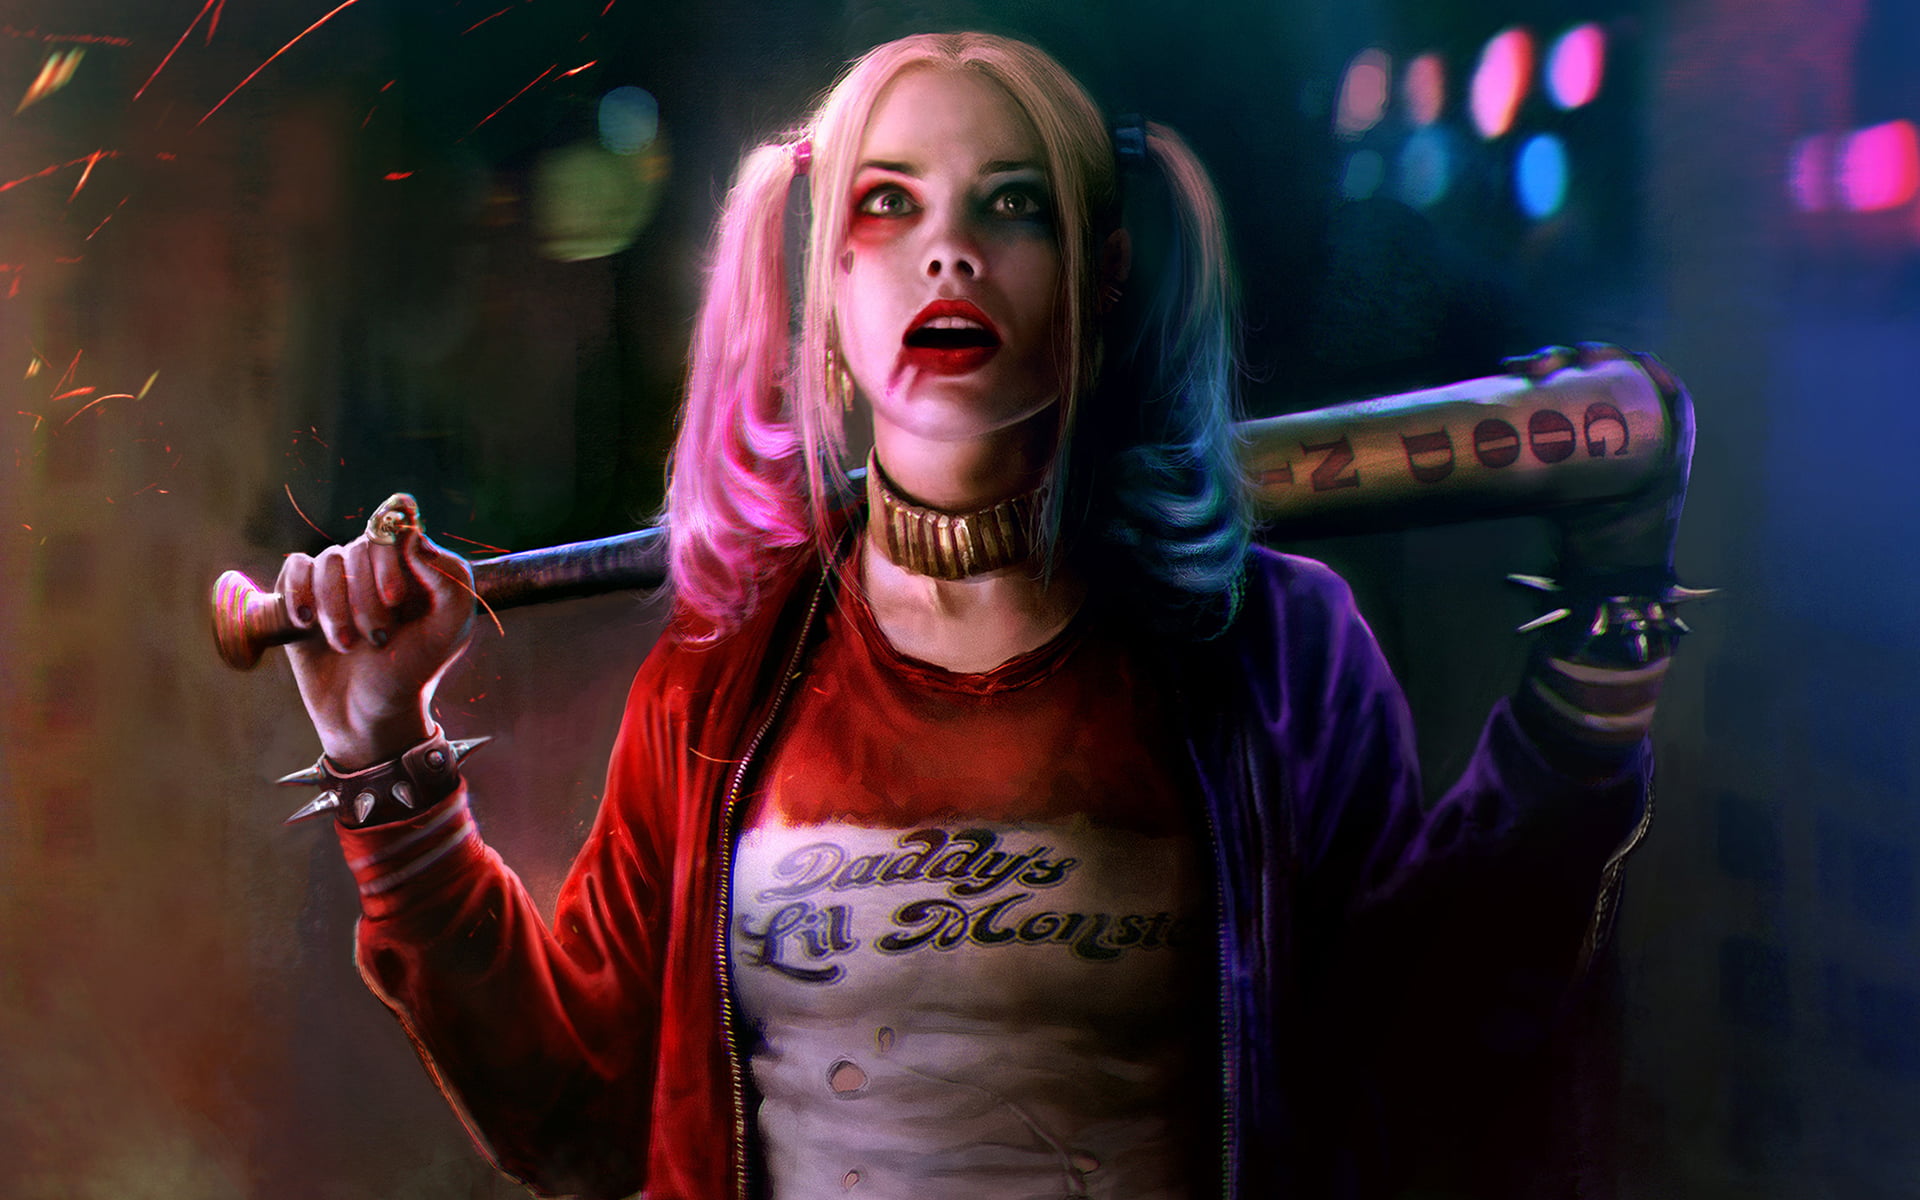 Free Download Hd Wallpaper Margot Robbie As Harley Quinn Suicide Squad Harley Quinn